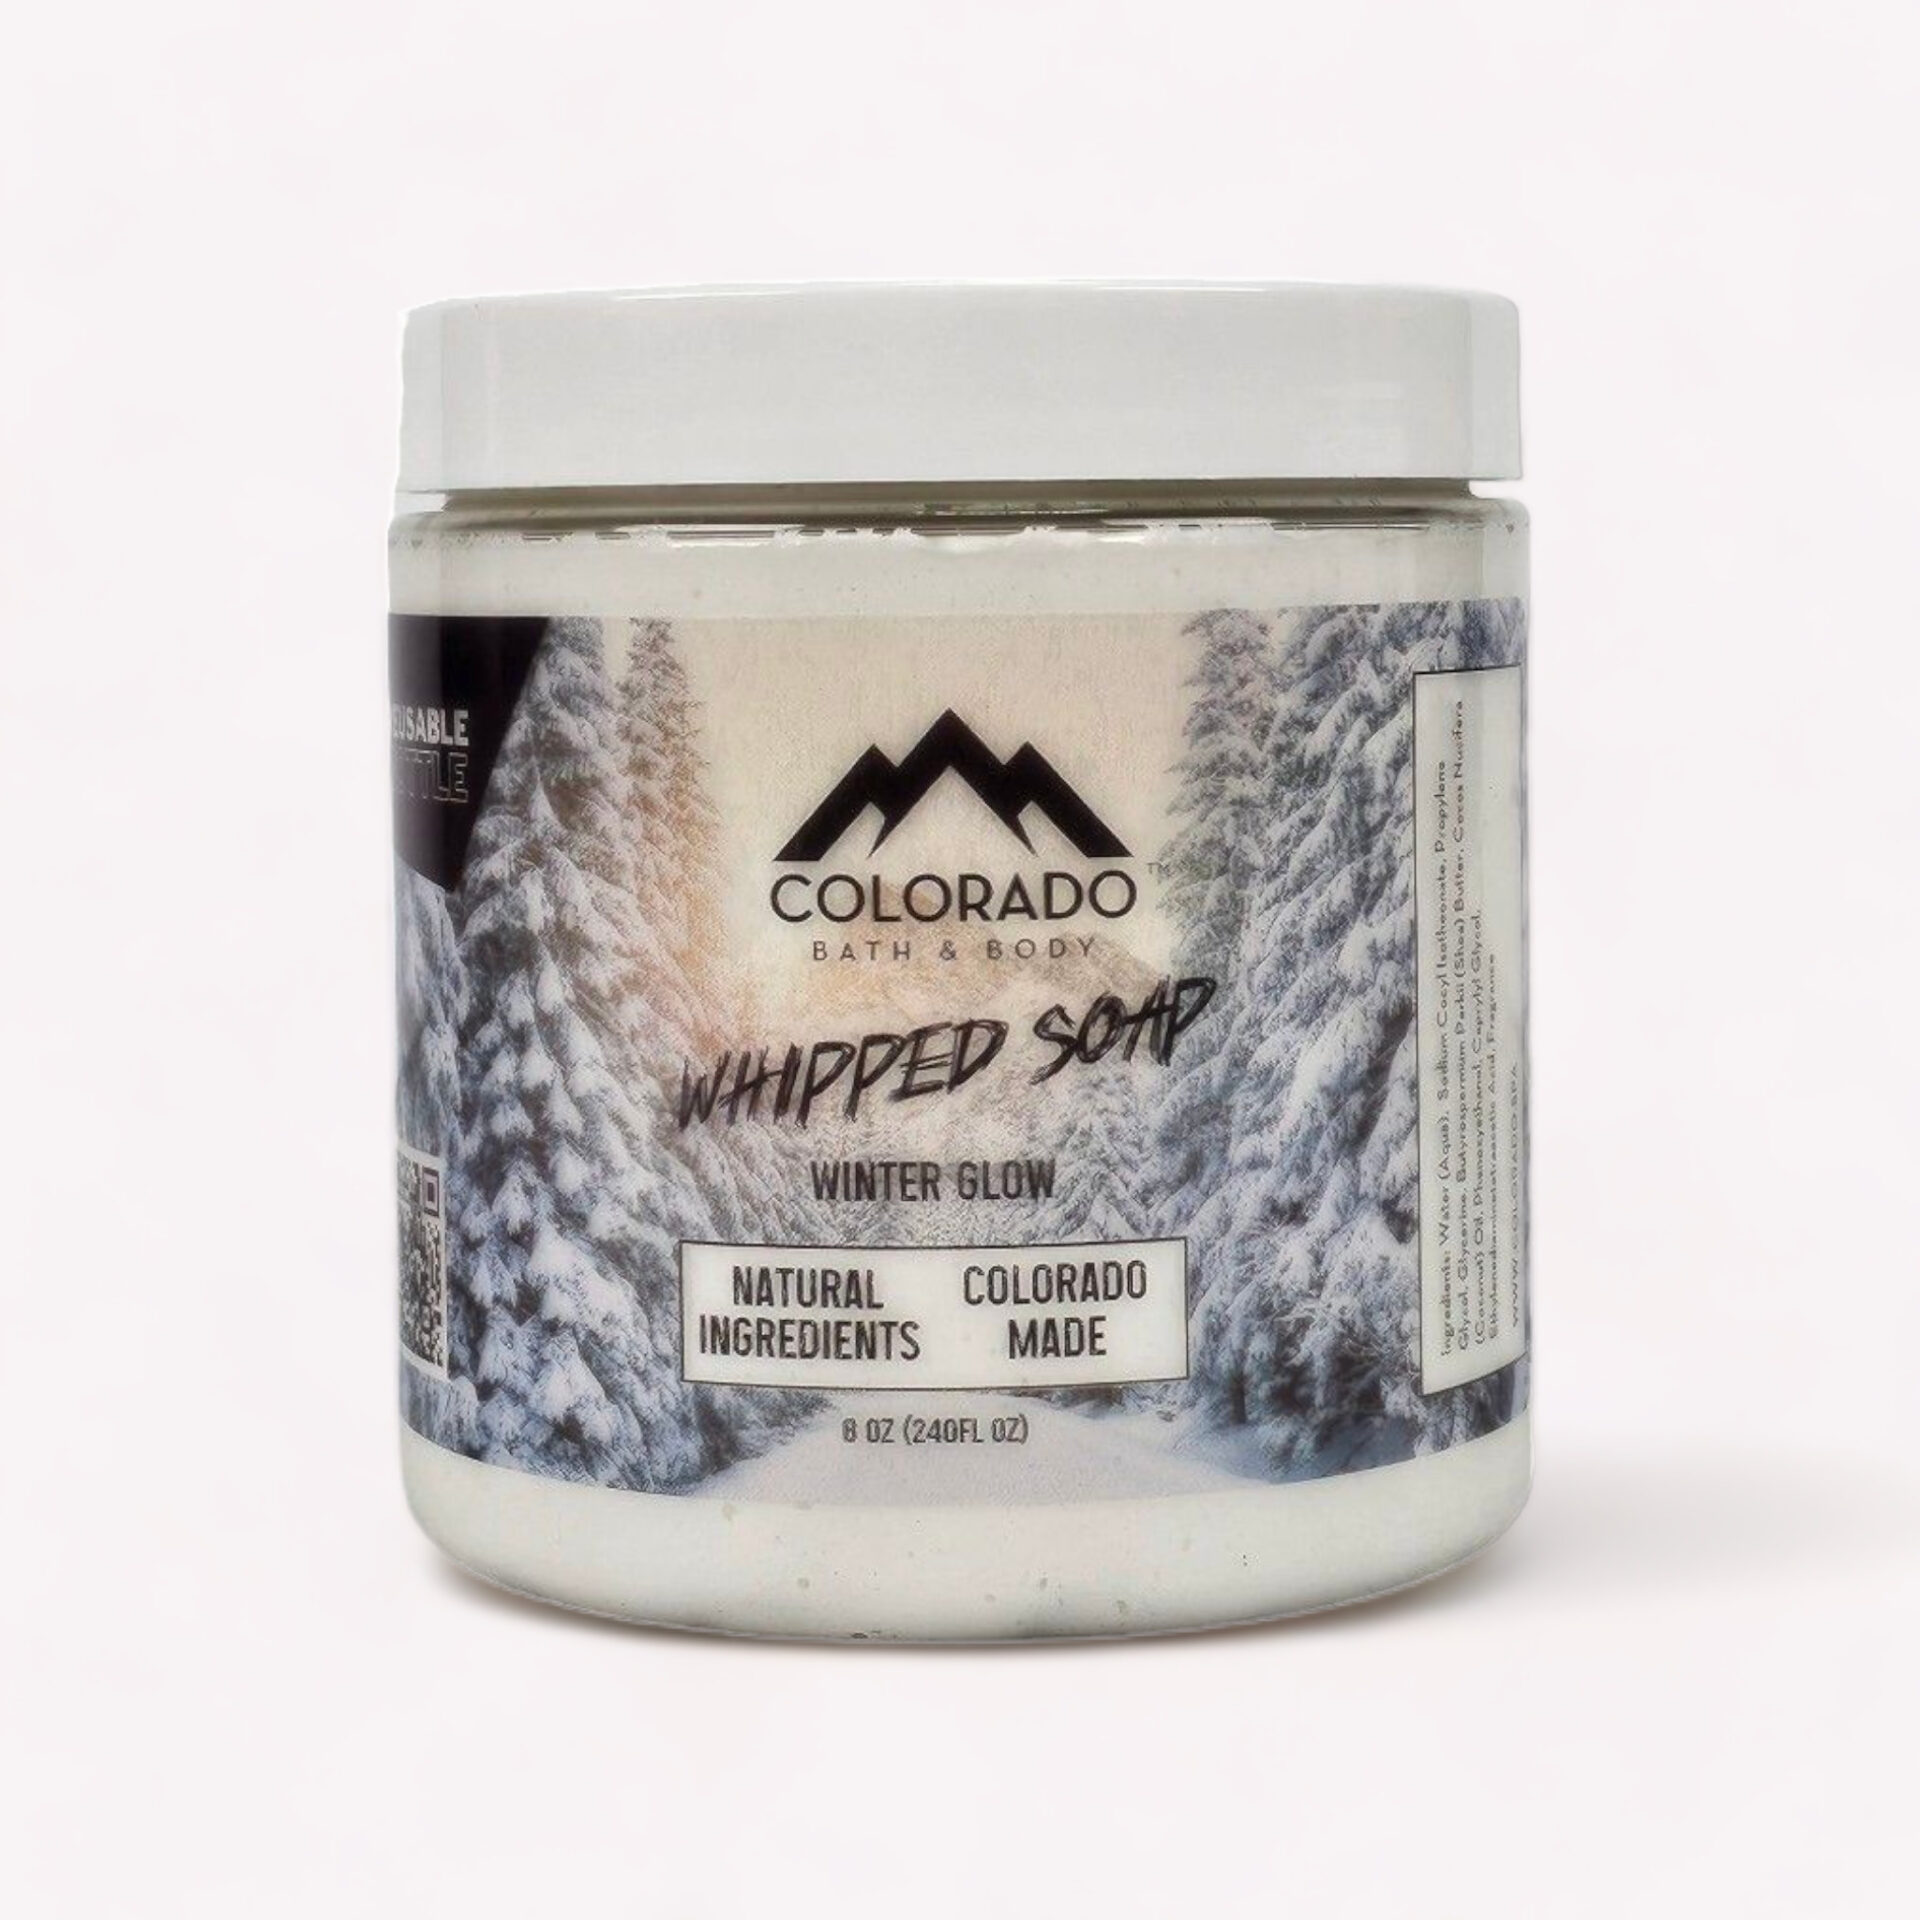 Winter Glow Limited Edition Whipped Soap